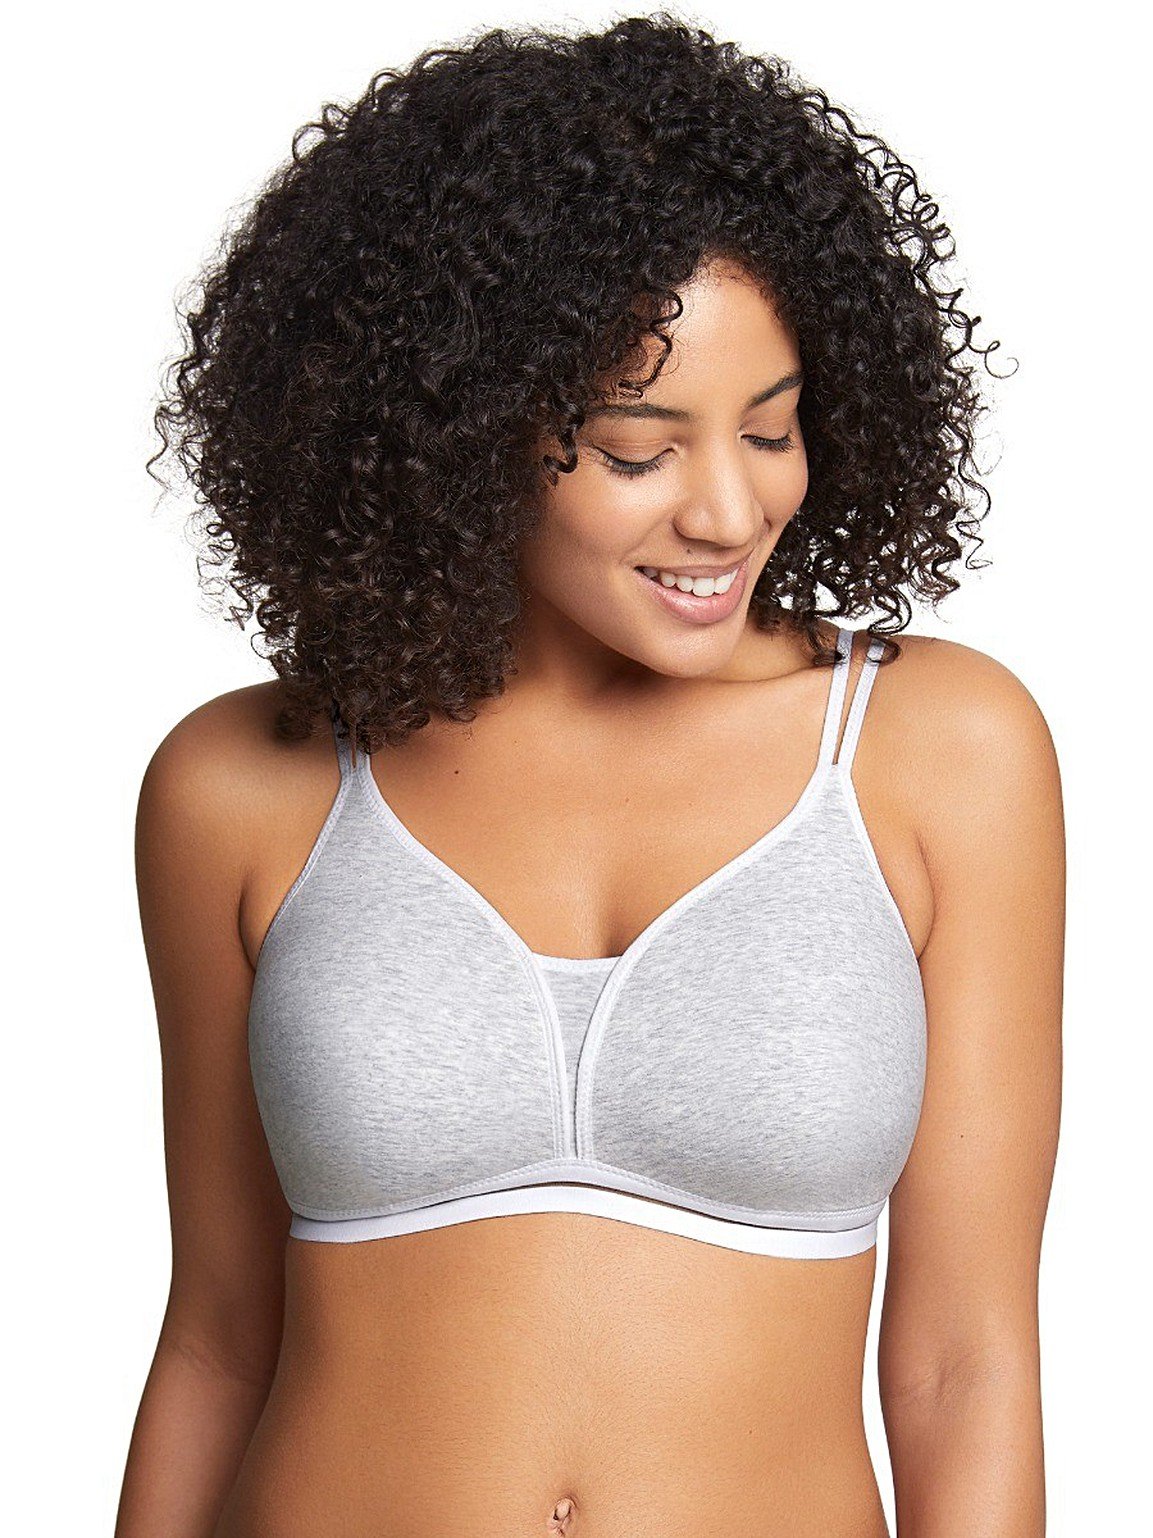 Posie – 2 pack t-shirt bra with optional racerback 8019-BLH/GRY